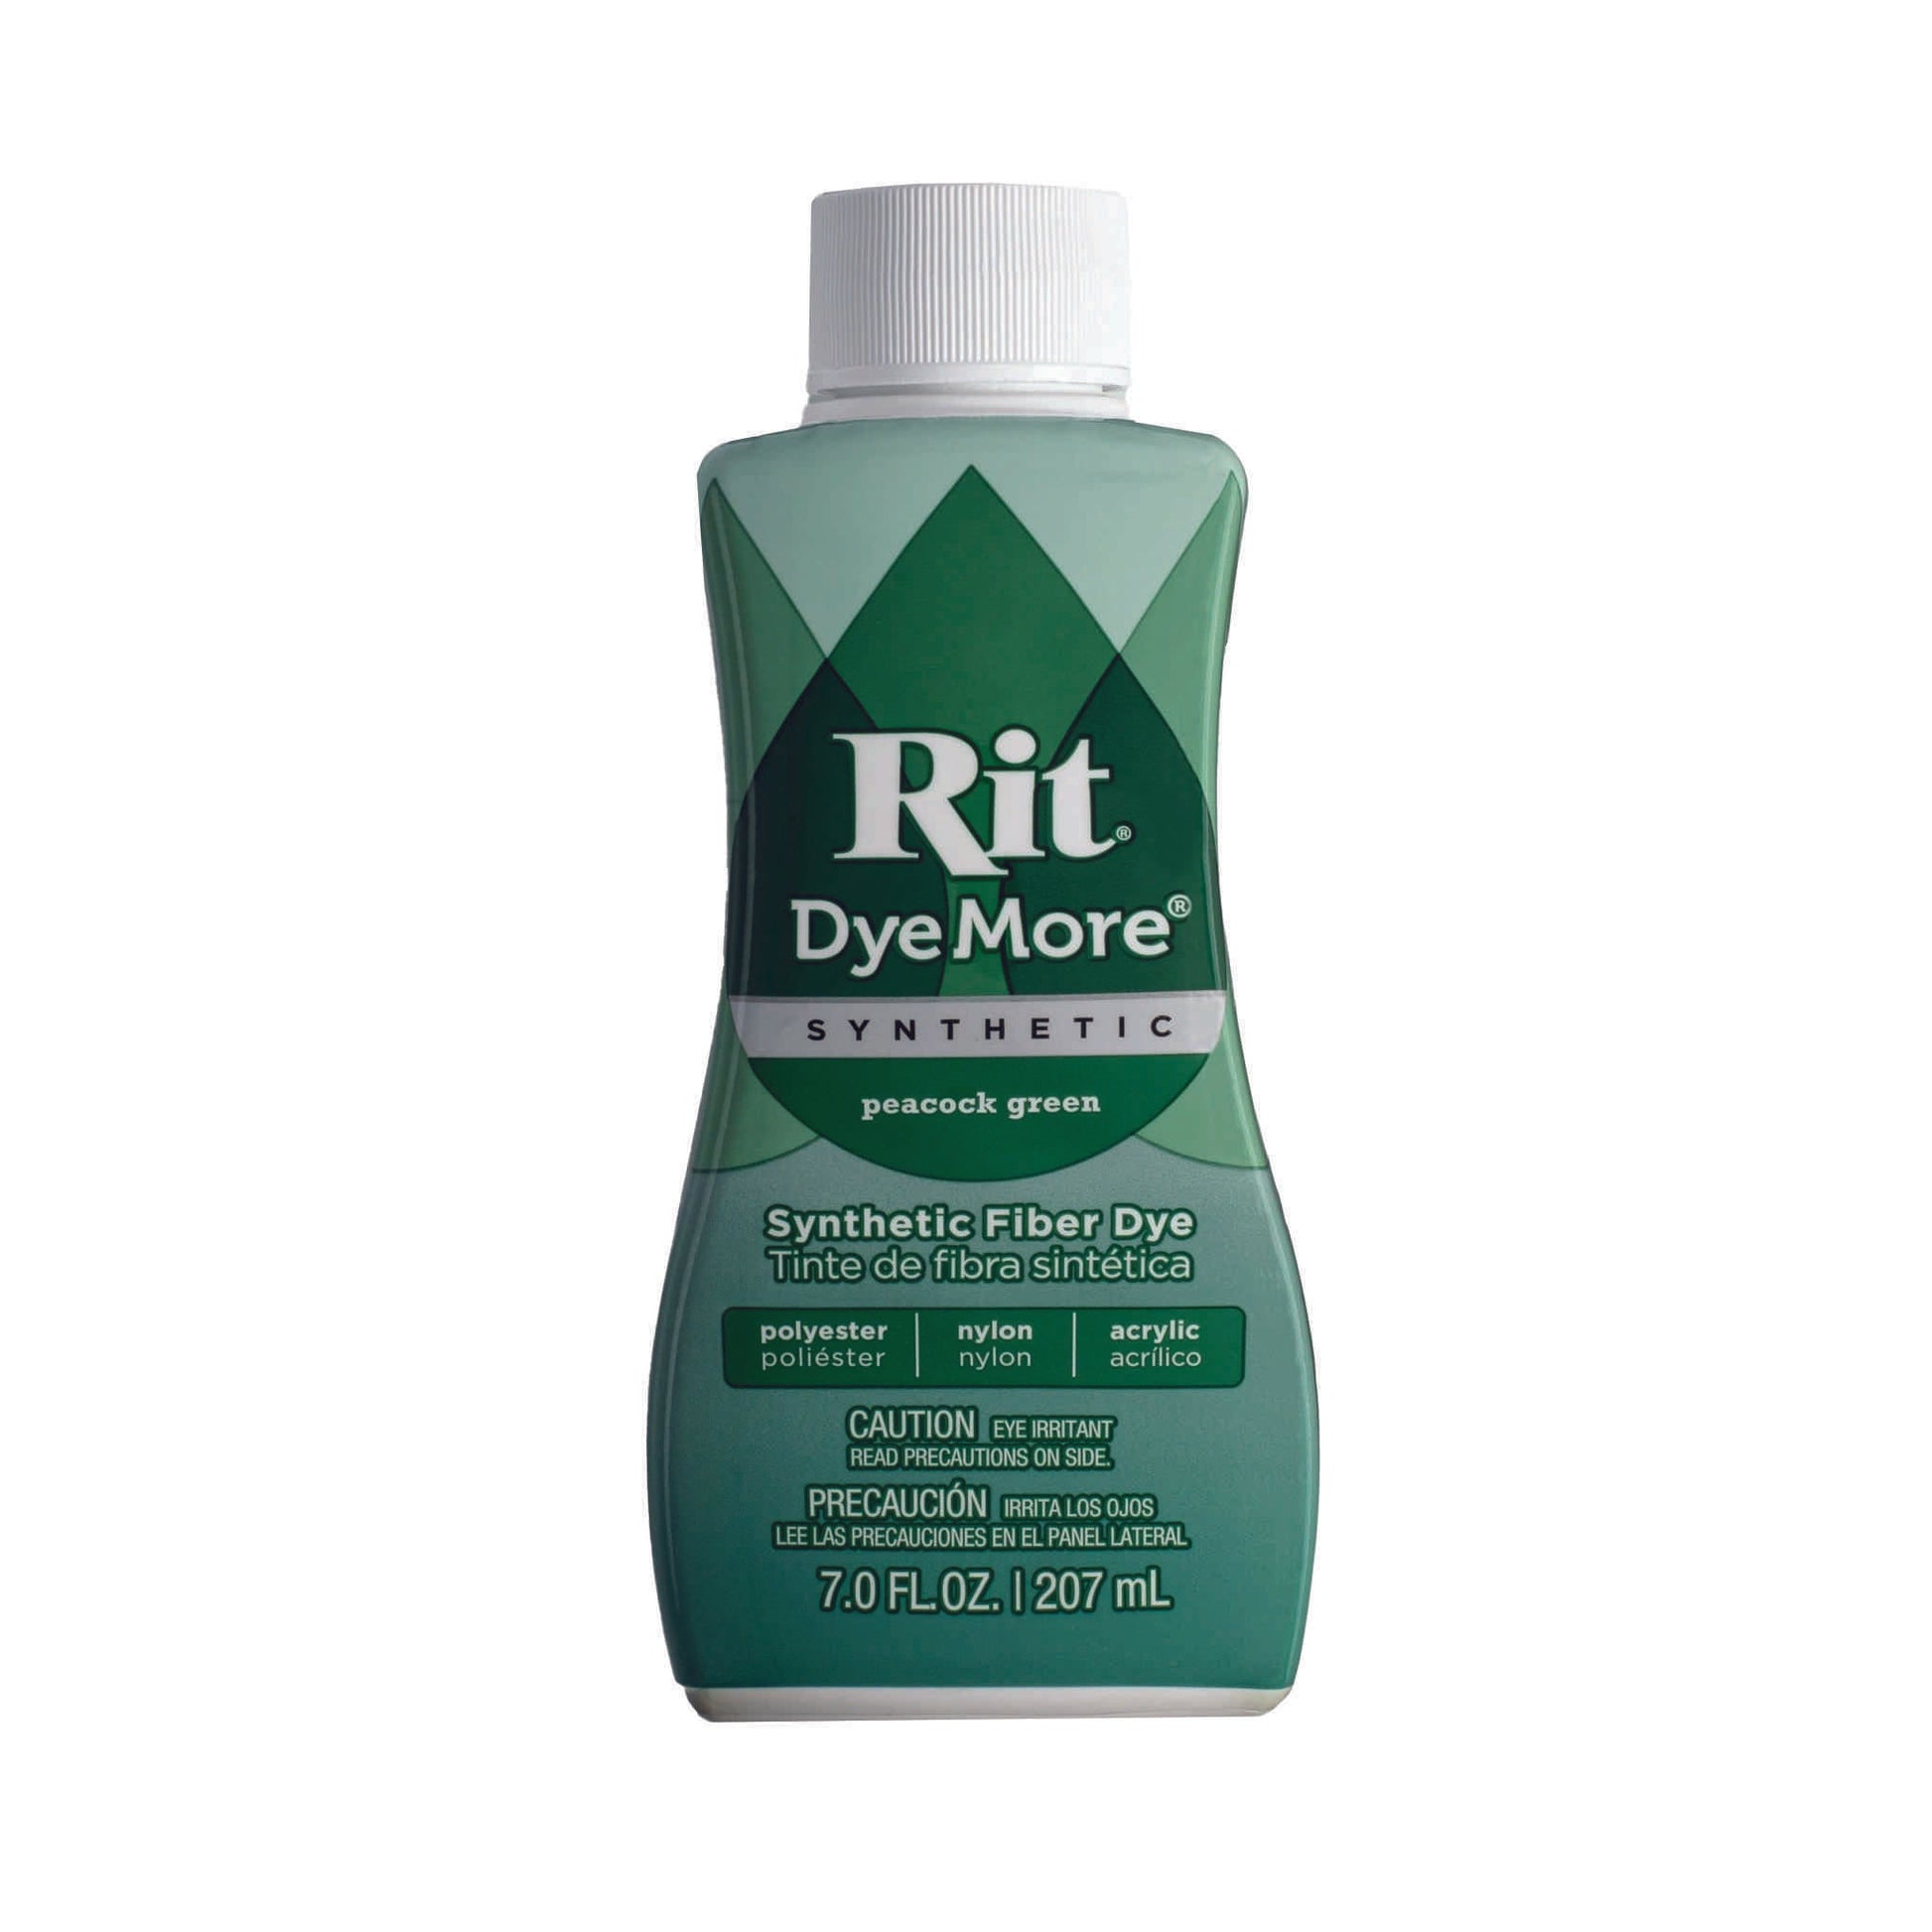 Synthetic RIT DyeMore Advanced Liquid Dye - PEACOCK GREEN - String